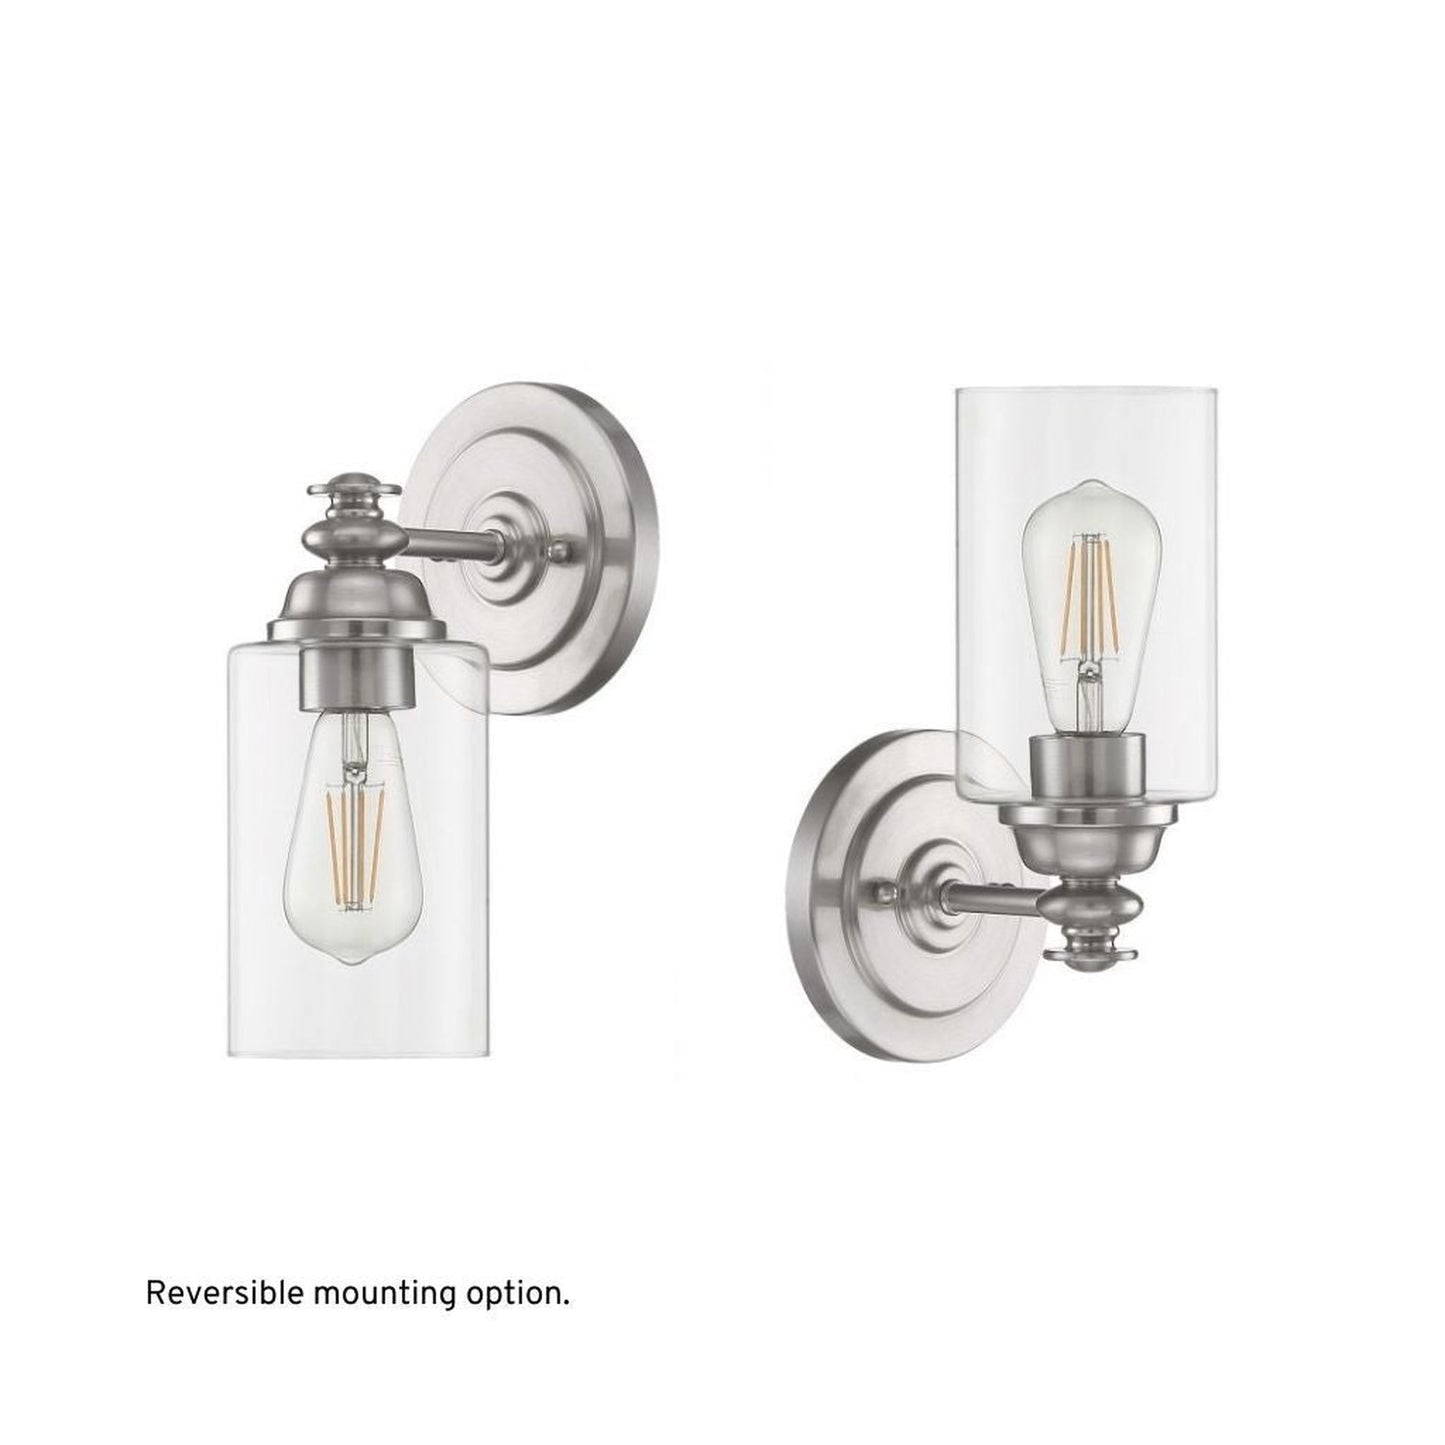 Craftmade Dardyn 6" x 11" 1-Light Brushed Polished Nickel Wall Sconce With Clear Glass Shade